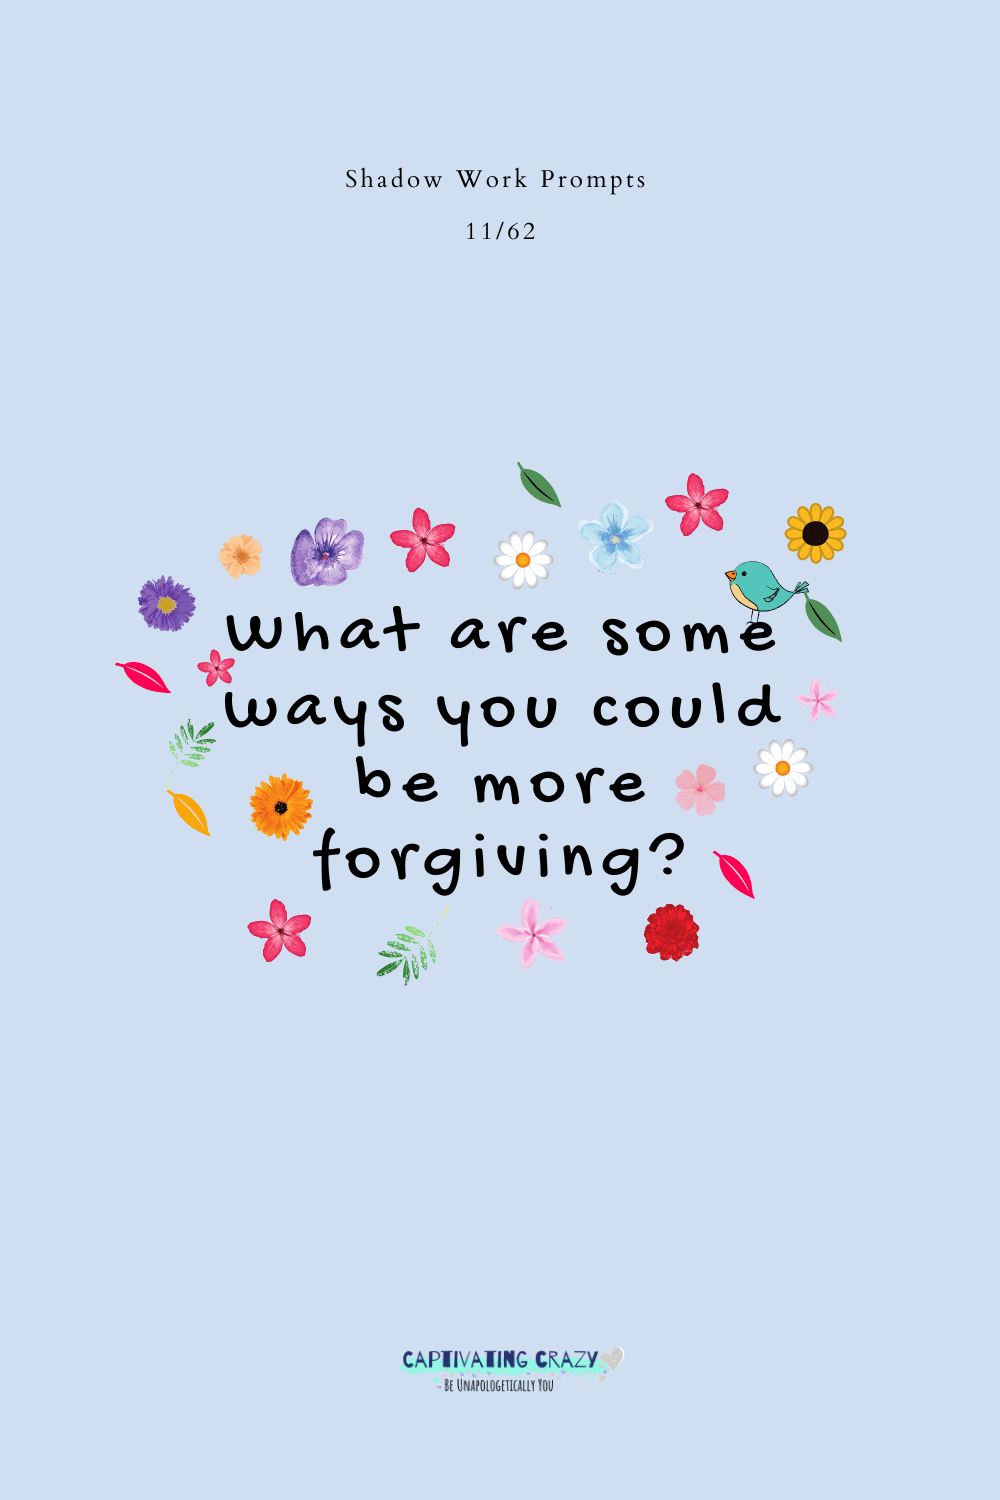 What are some ways you could be more forgiving?